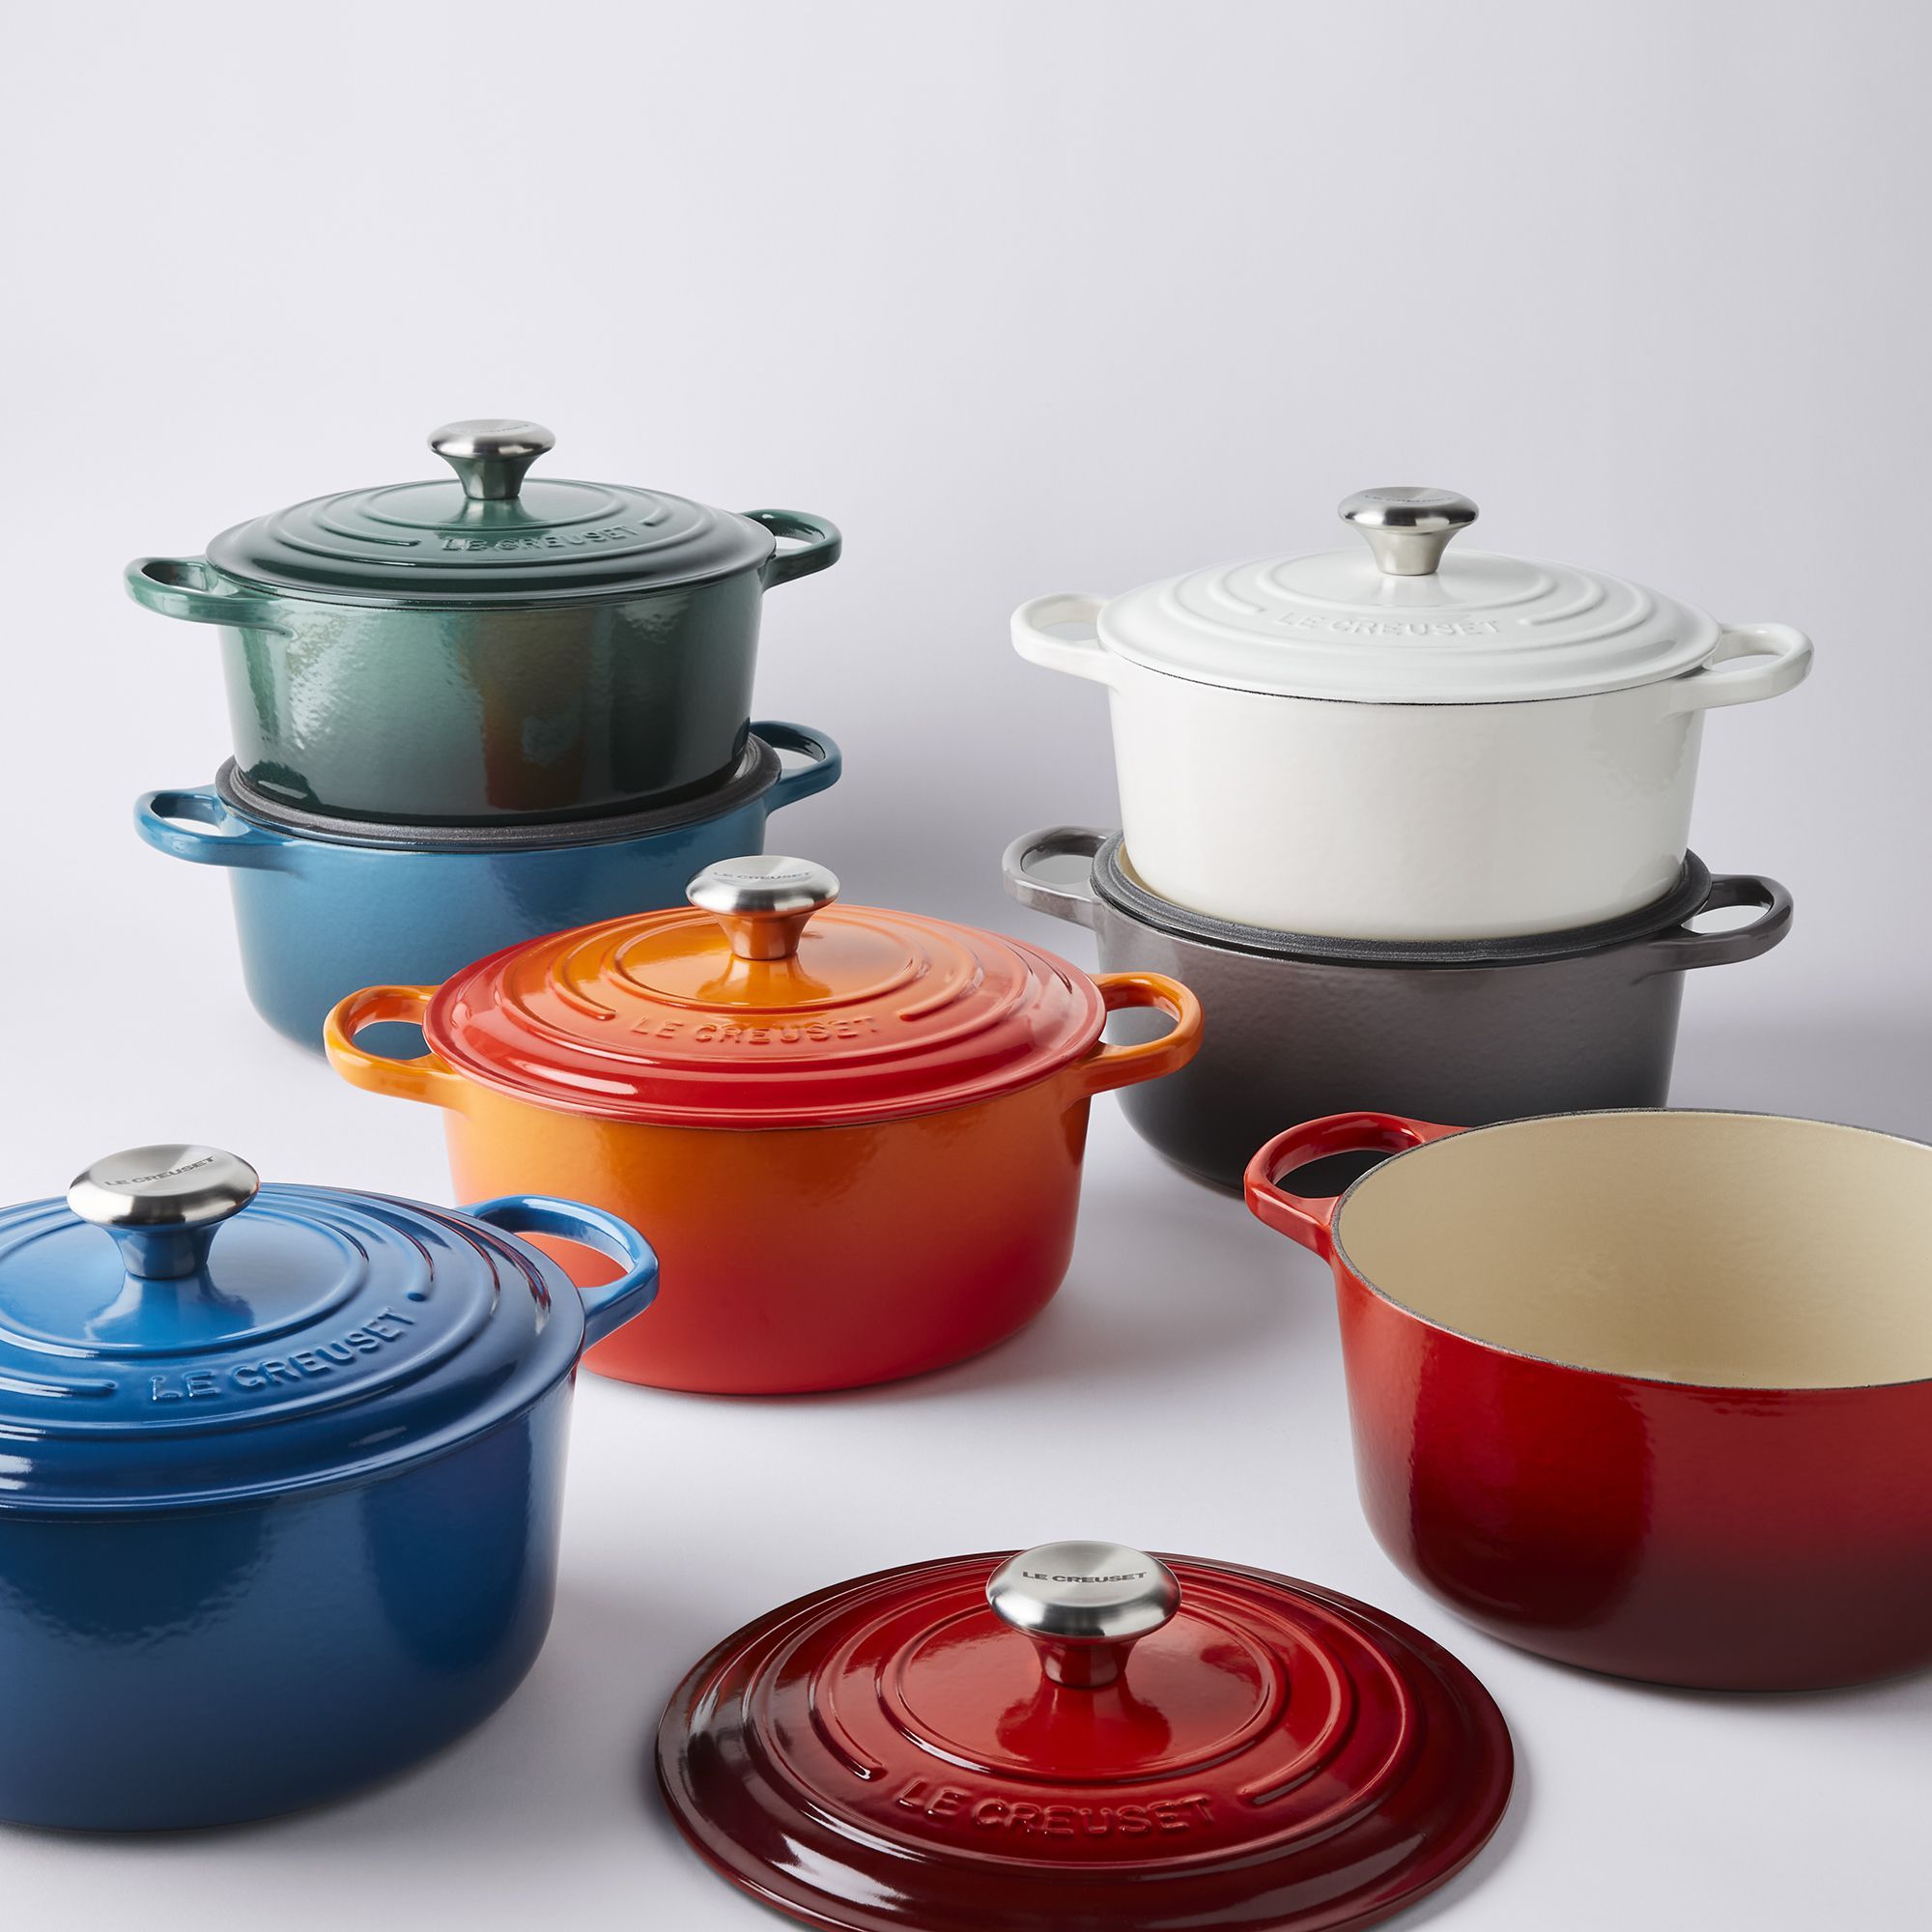 Le Creuset Is Discontinuing Deep Teal—and Having a Major Sale